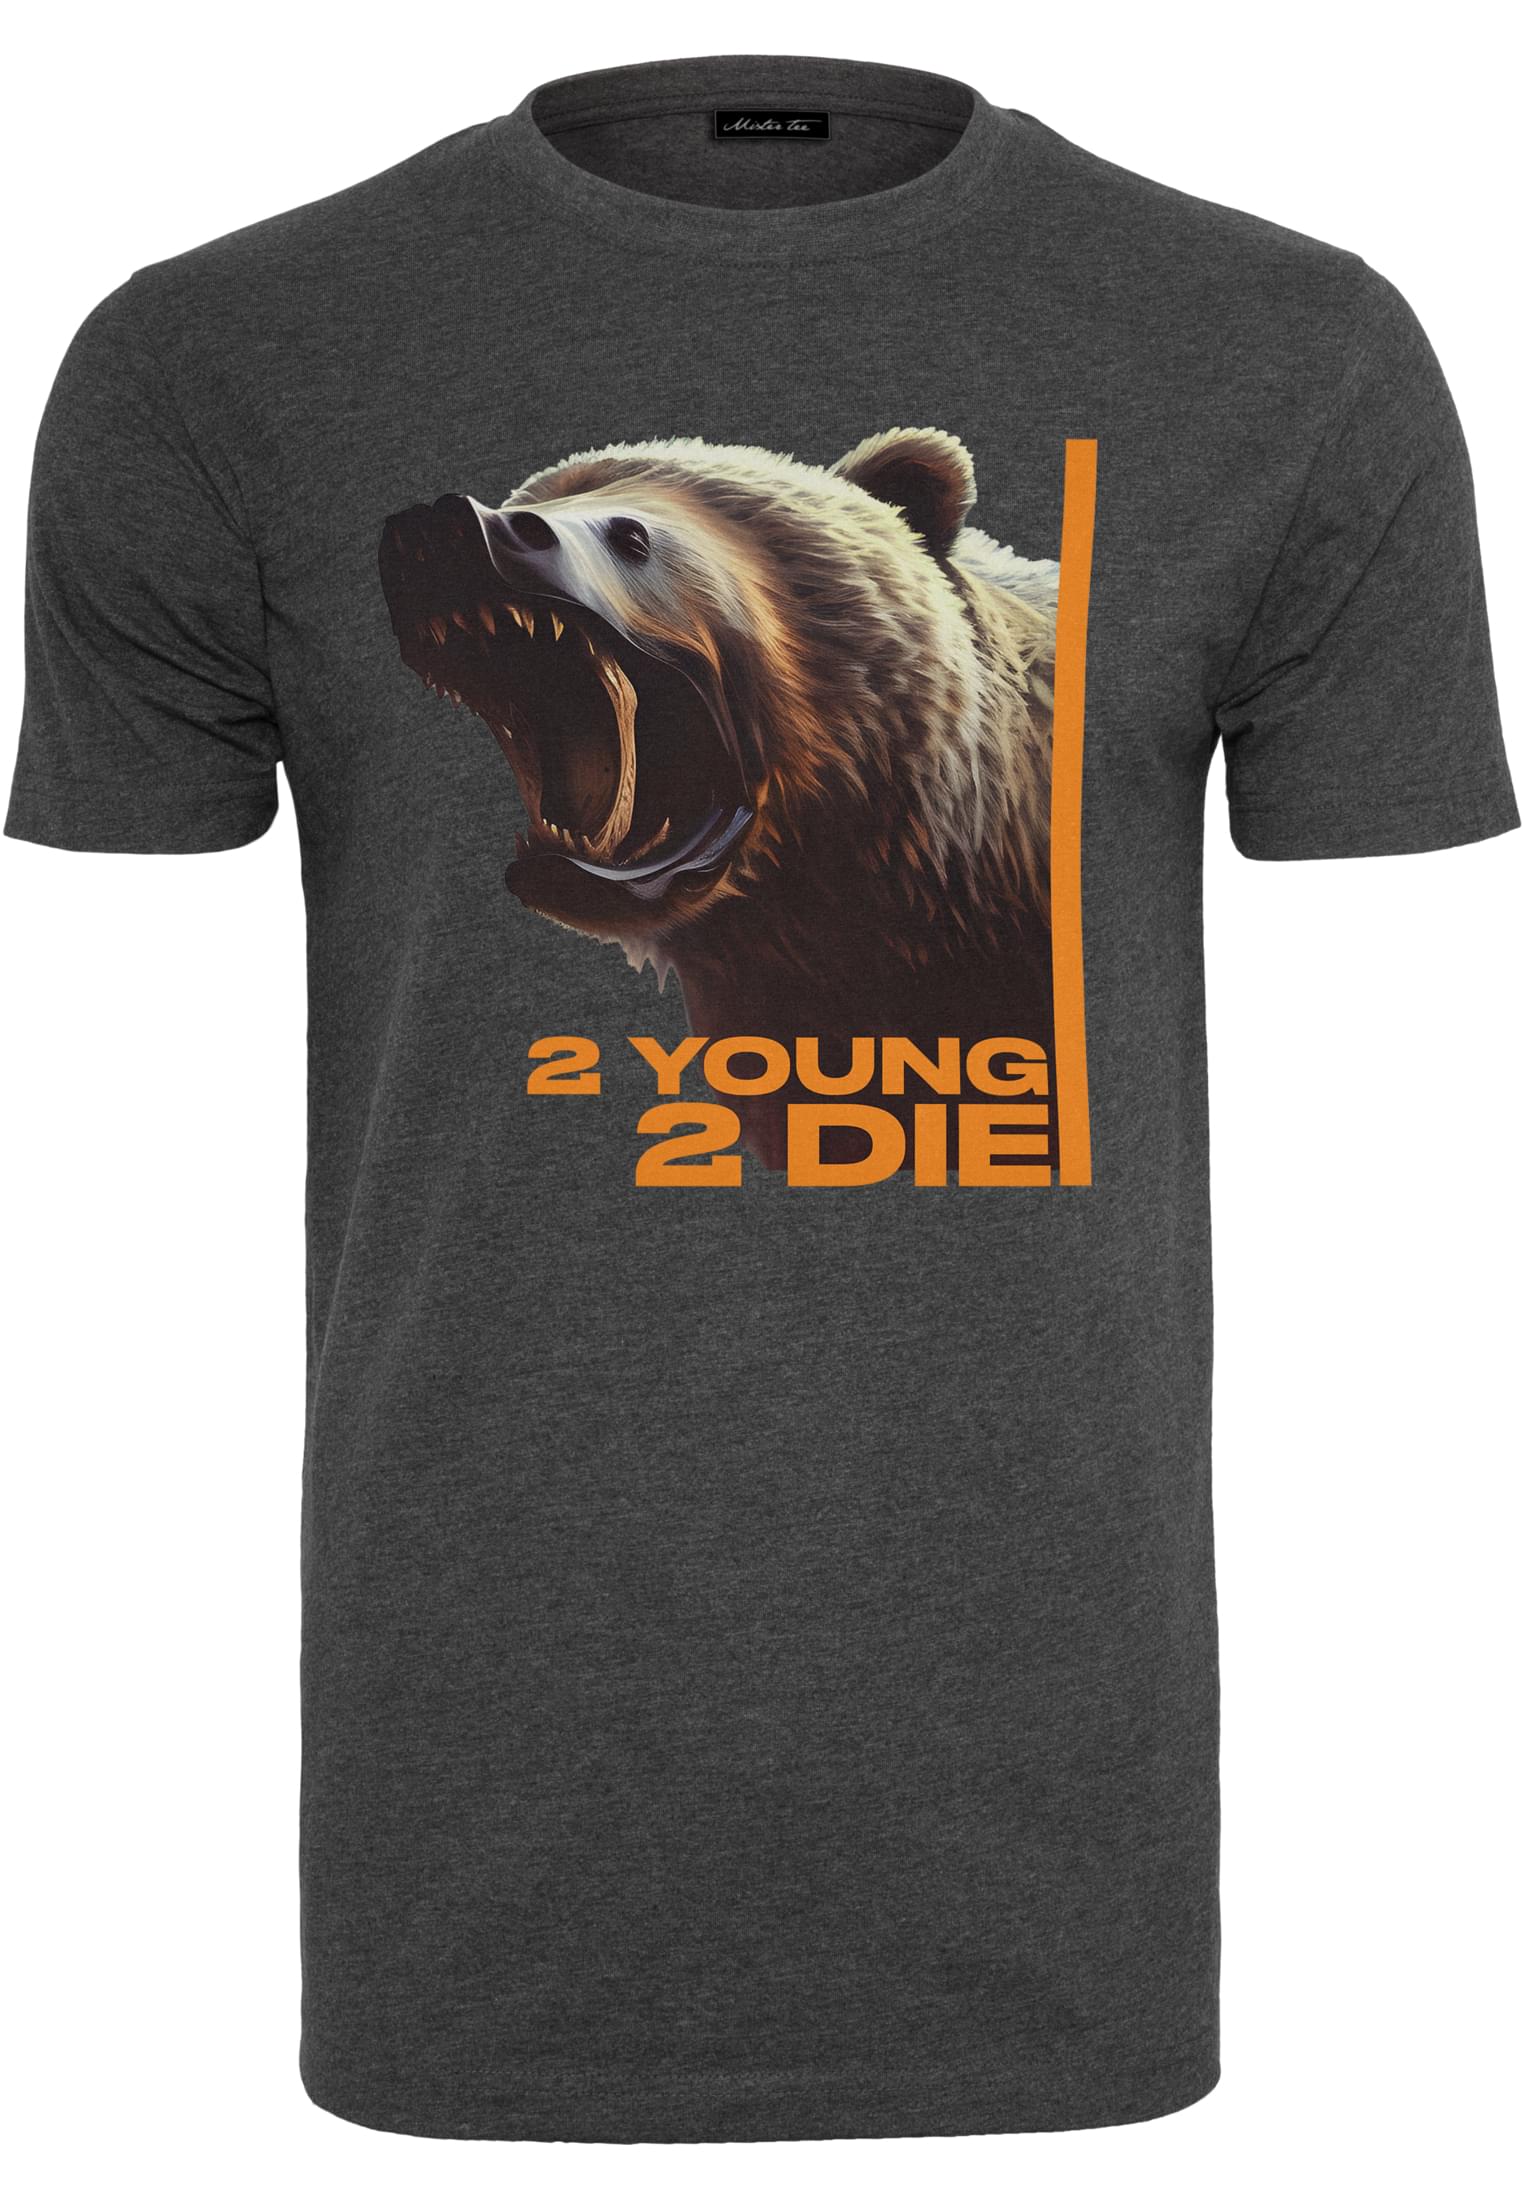 2 Young 2 Die Tee Charcoal